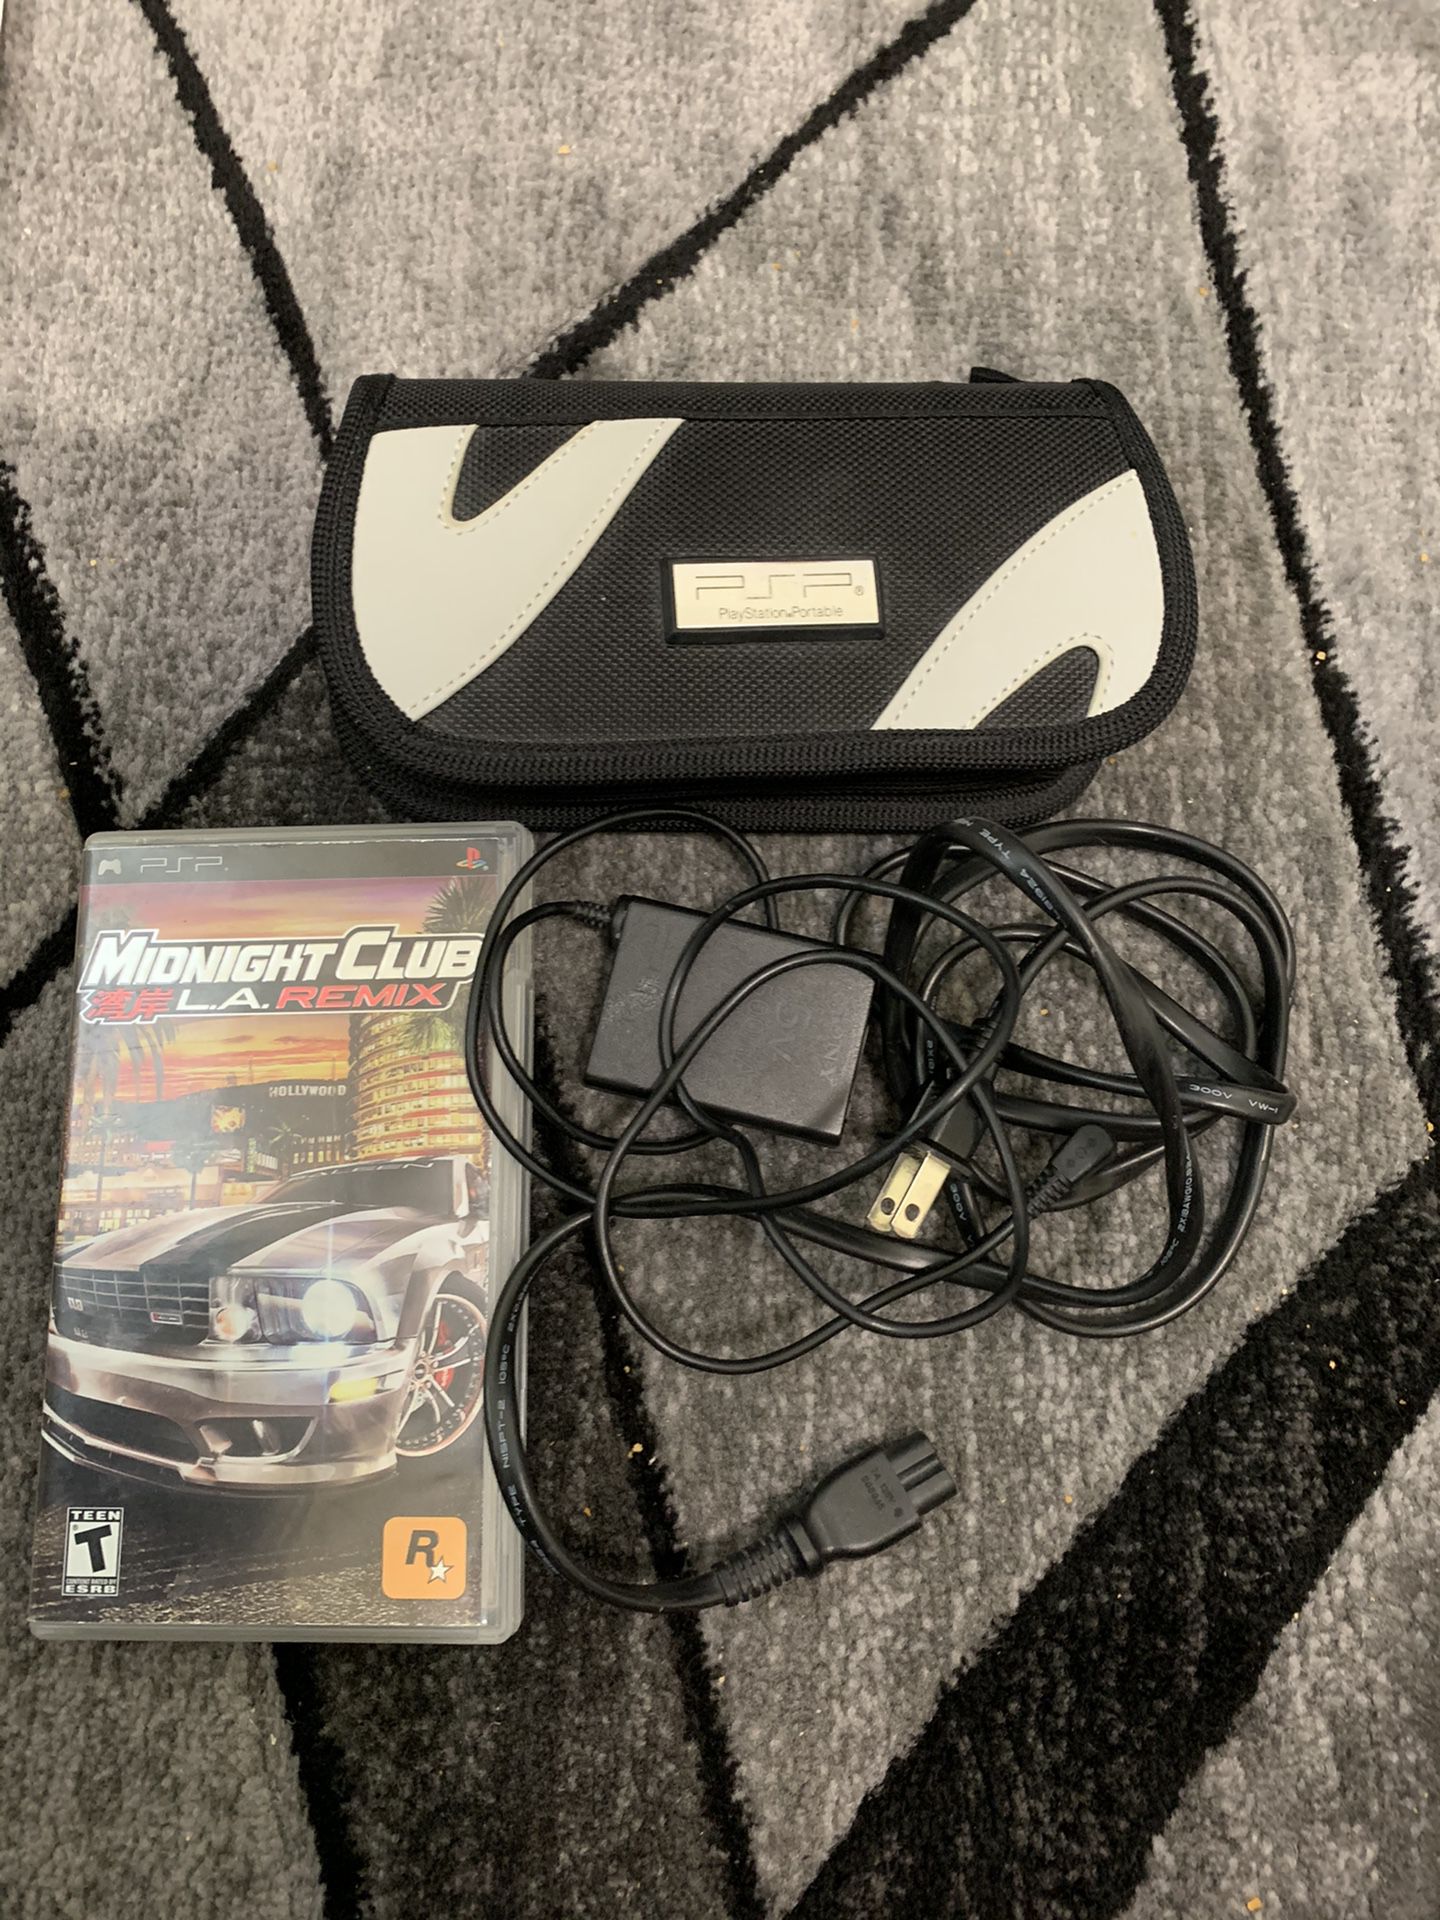 PSP carrying case, charger, and midnight club videogame